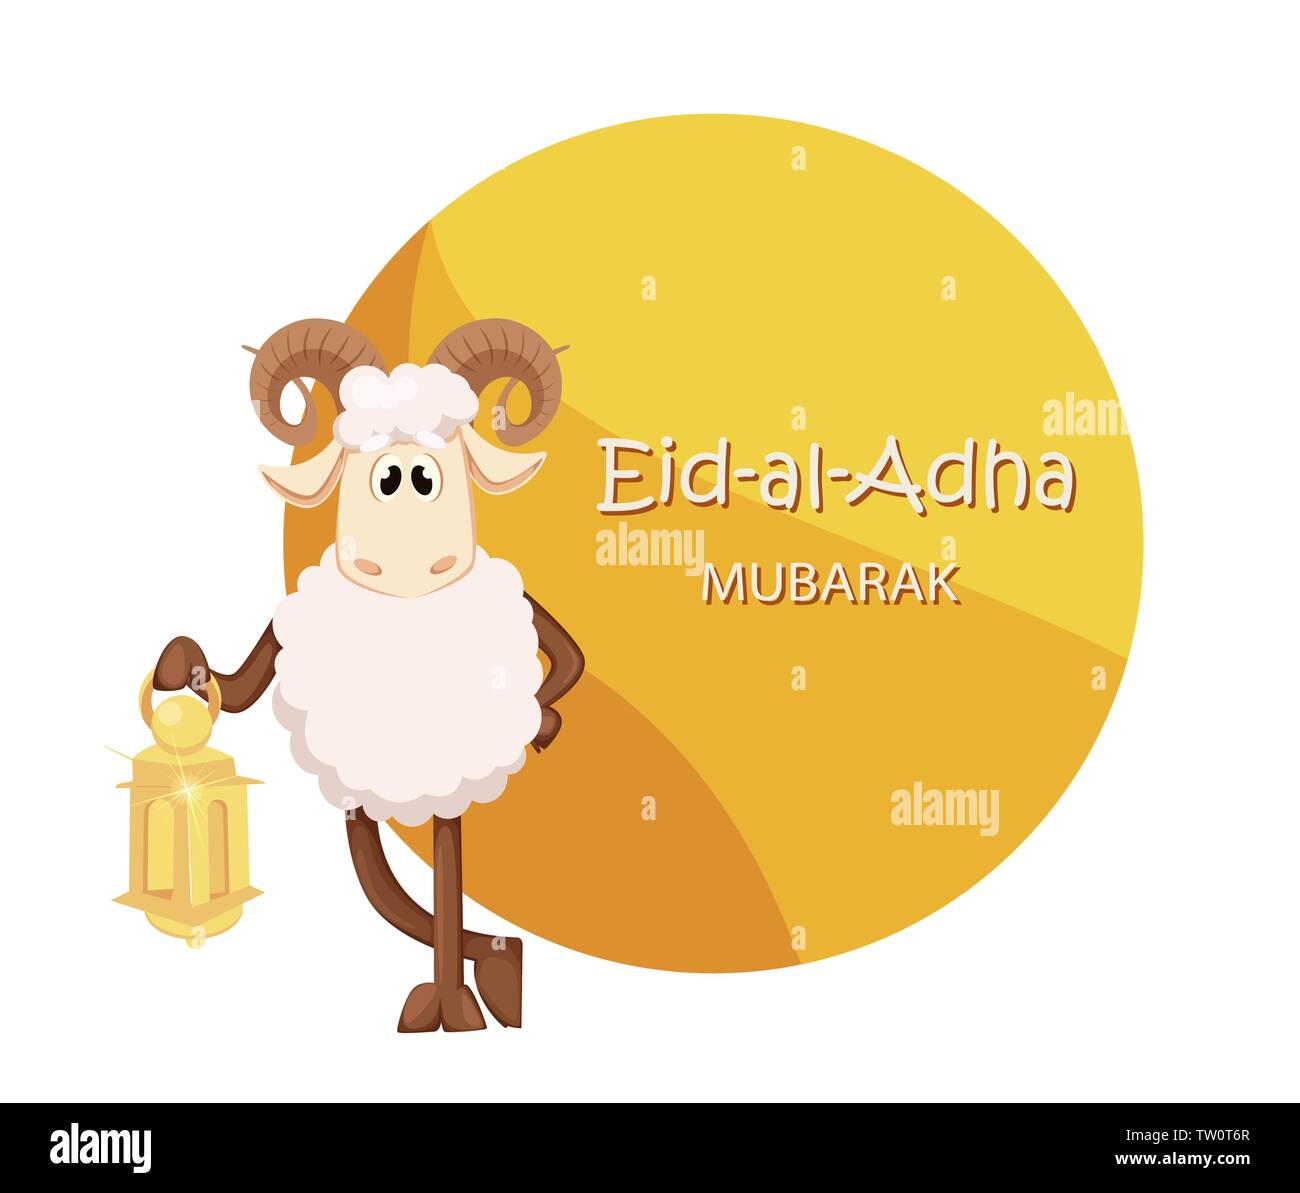 Eid al Adha Mubarak greeting card with funny ram holding lantern. Traditional Muslim holiday. Vector illustration with yellow circle on background Stock Vector